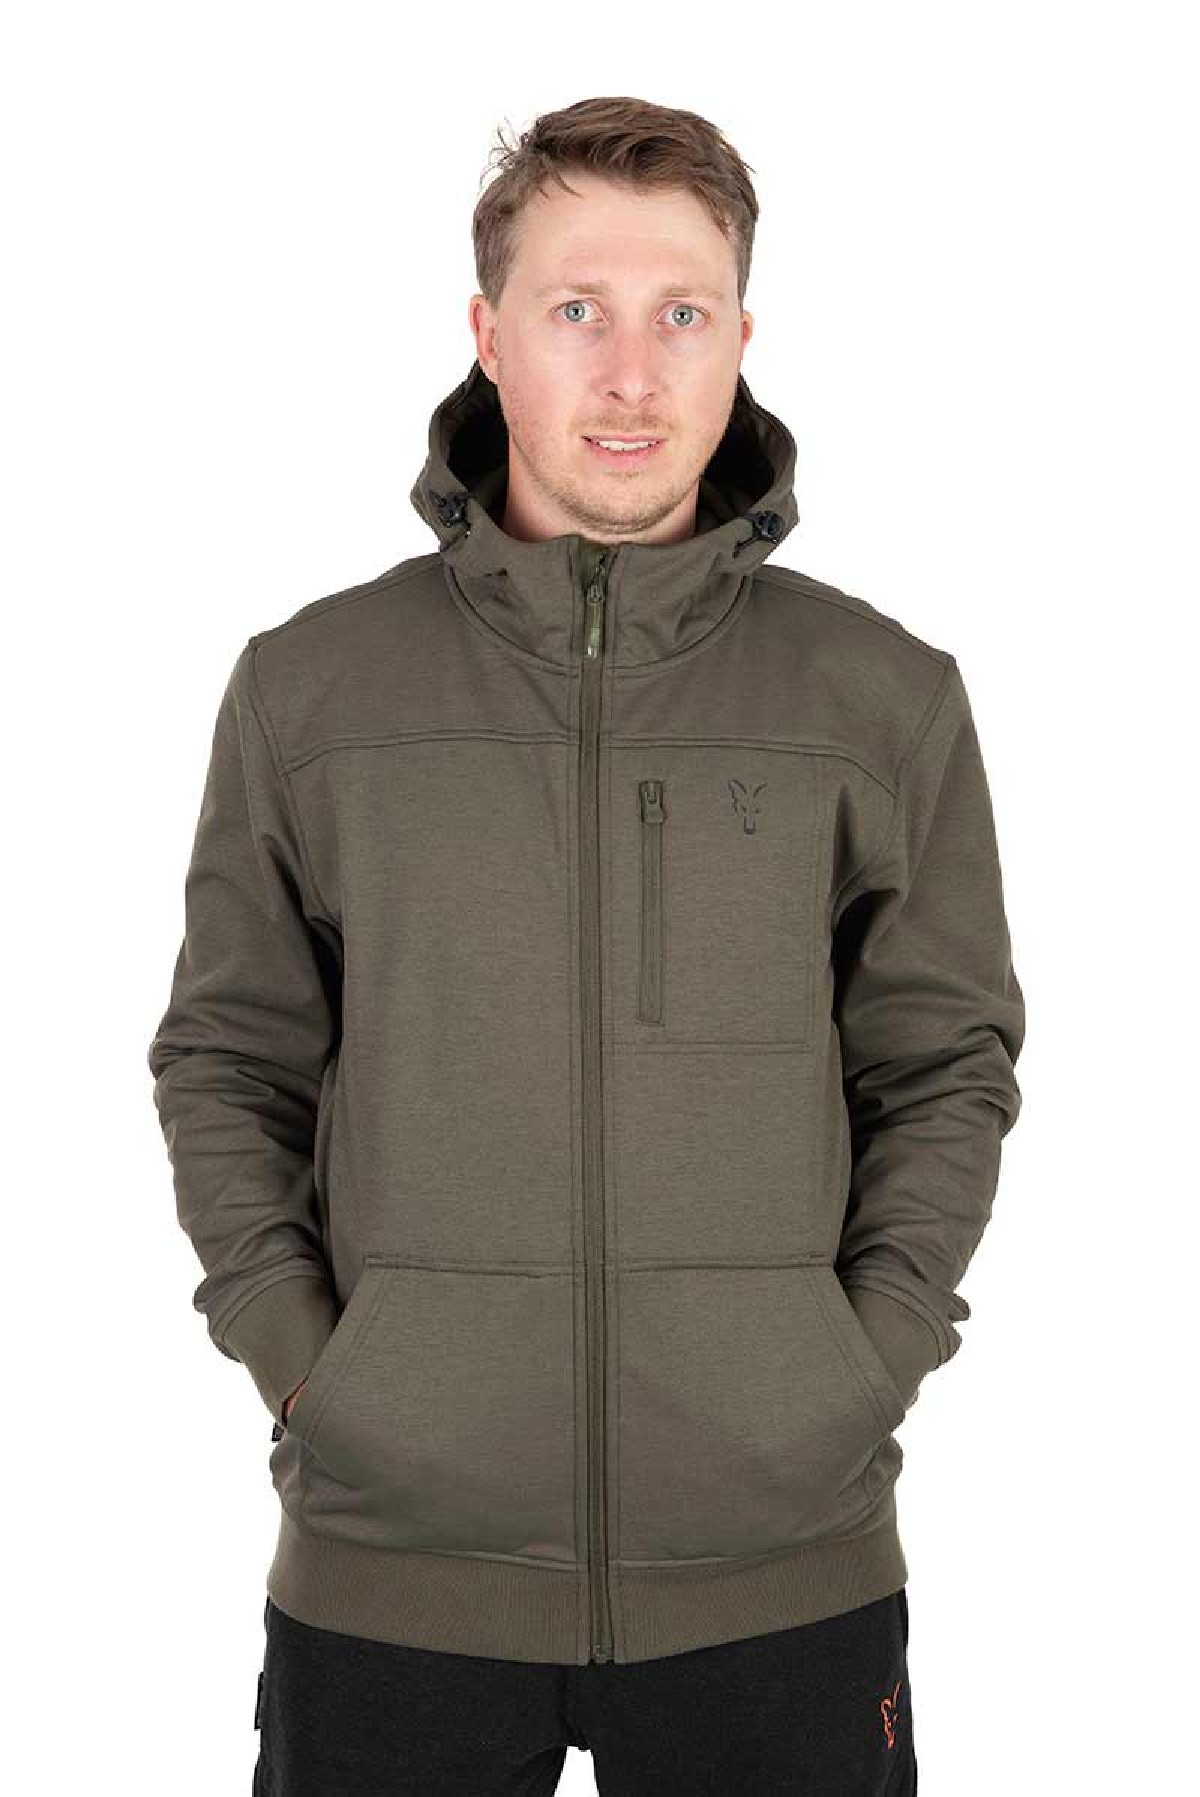 Fox Collection Soft Shell Jacket Green & Black Small